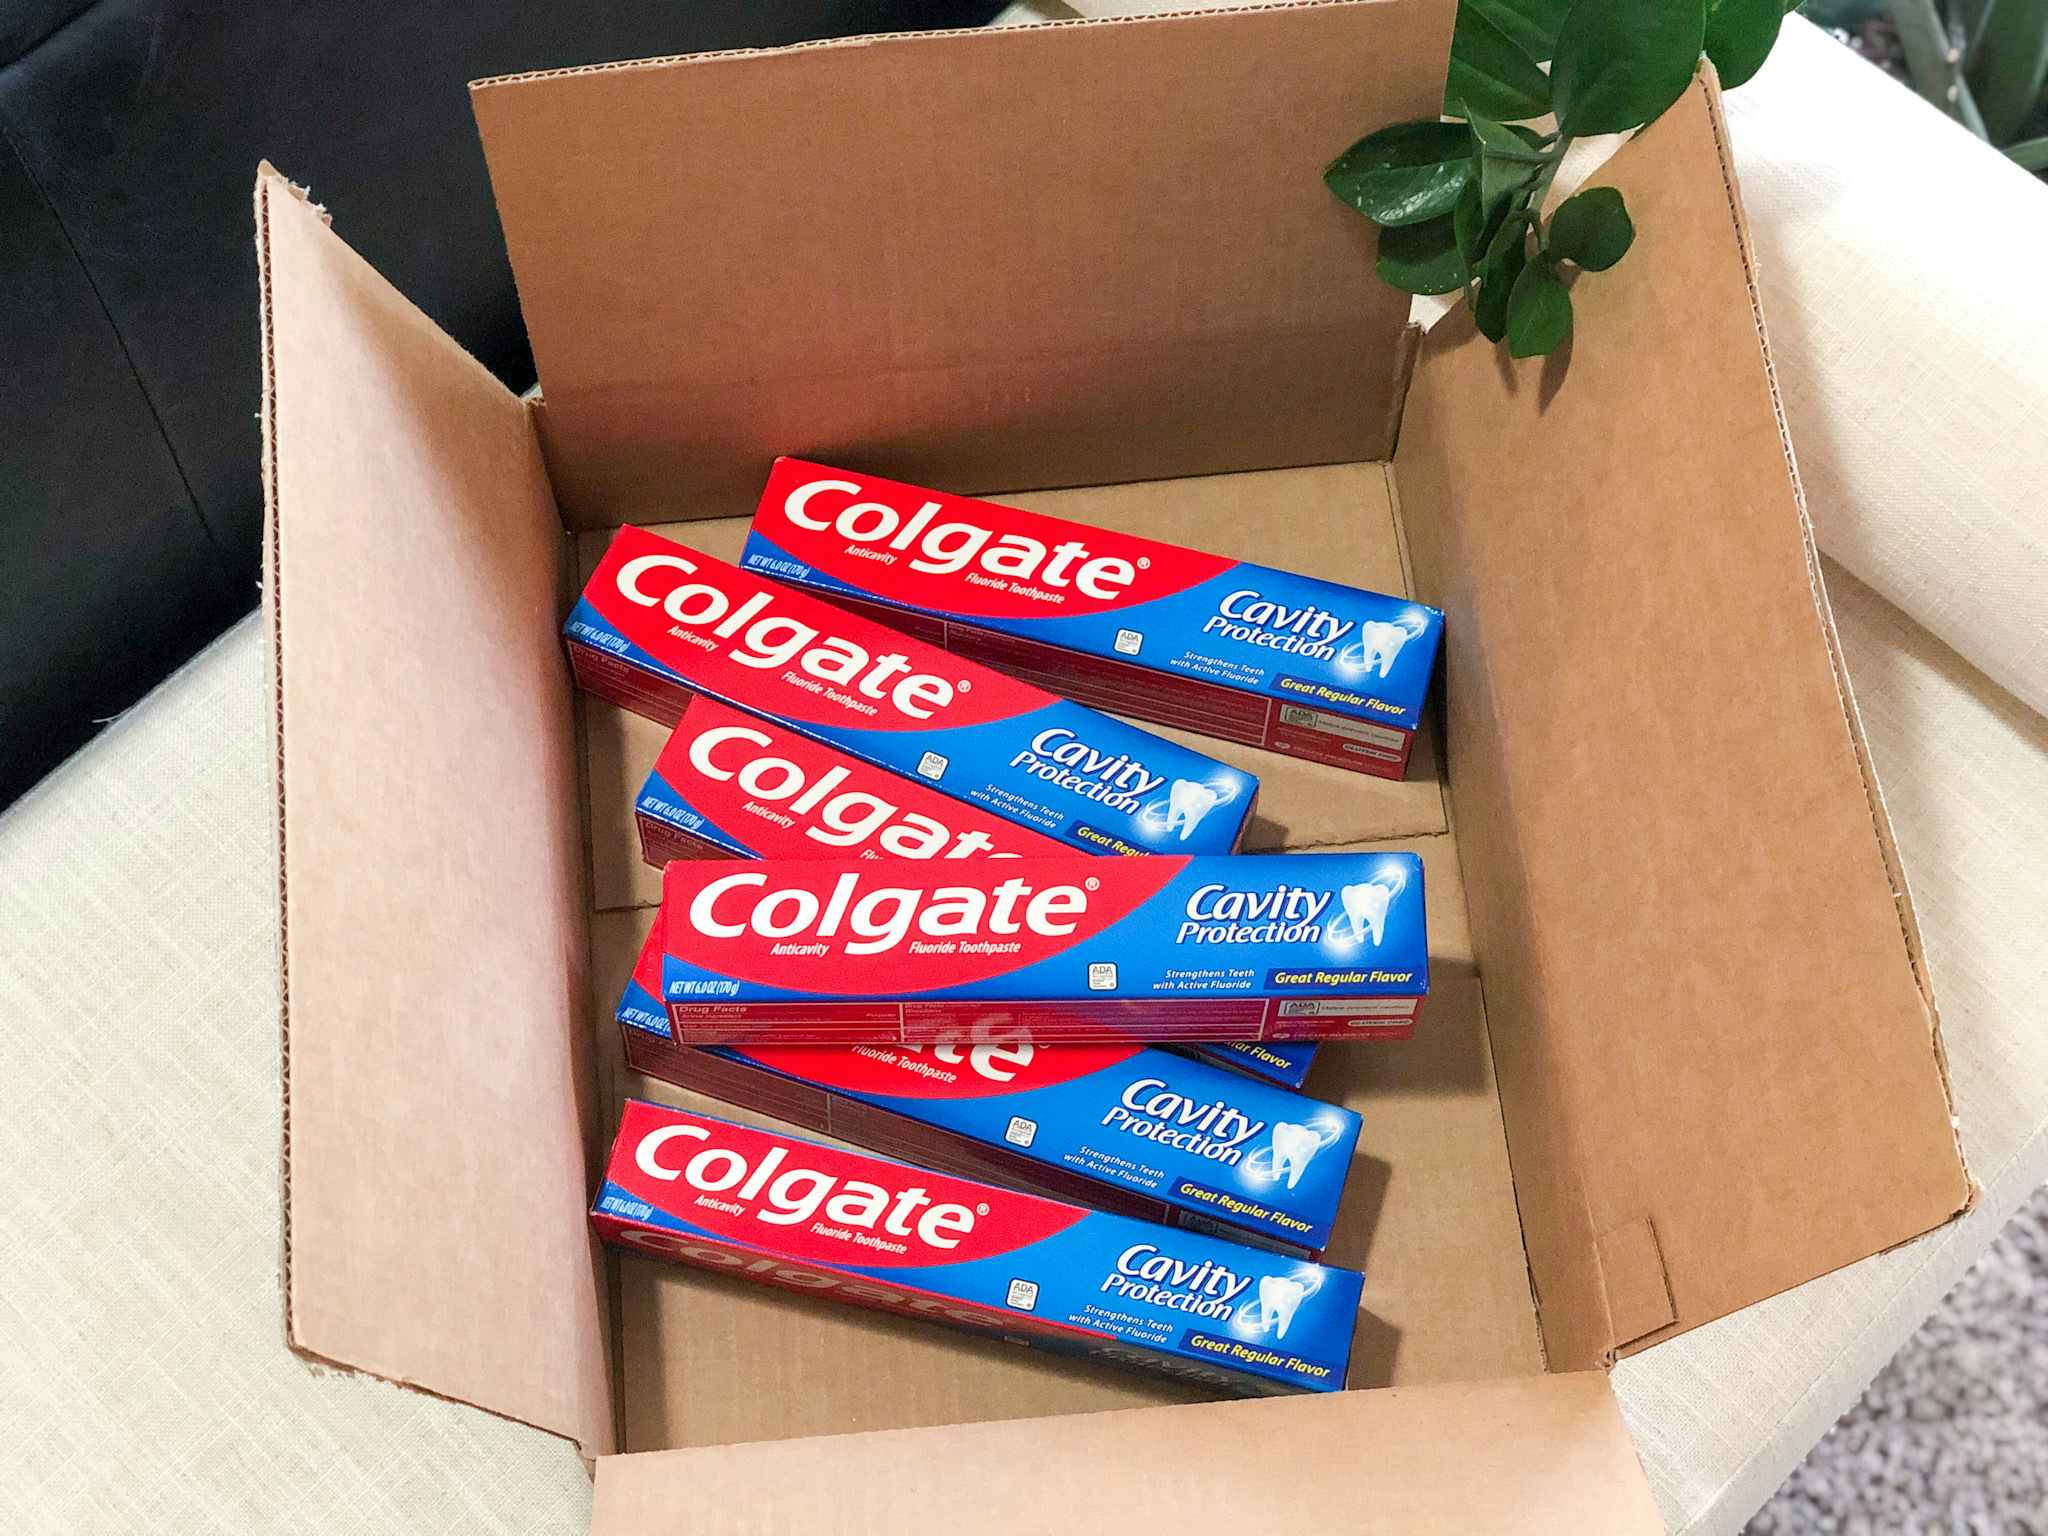 Colgate Cavity Protection Toothpaste 6-Pack, Now $7.68 on Amazon